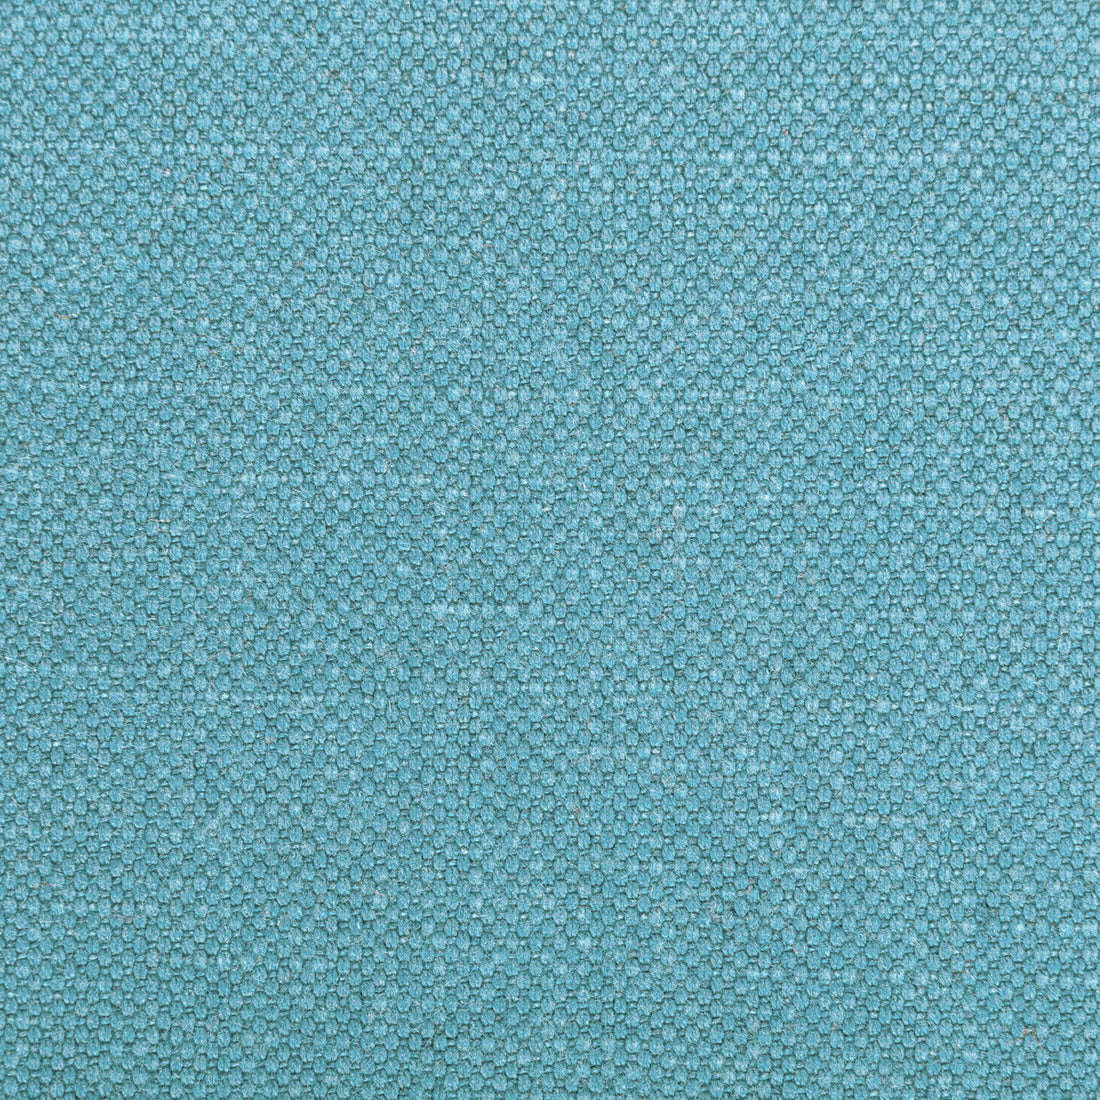 Carson fabric in sky color - pattern 36282.1155.0 - by Kravet Basics